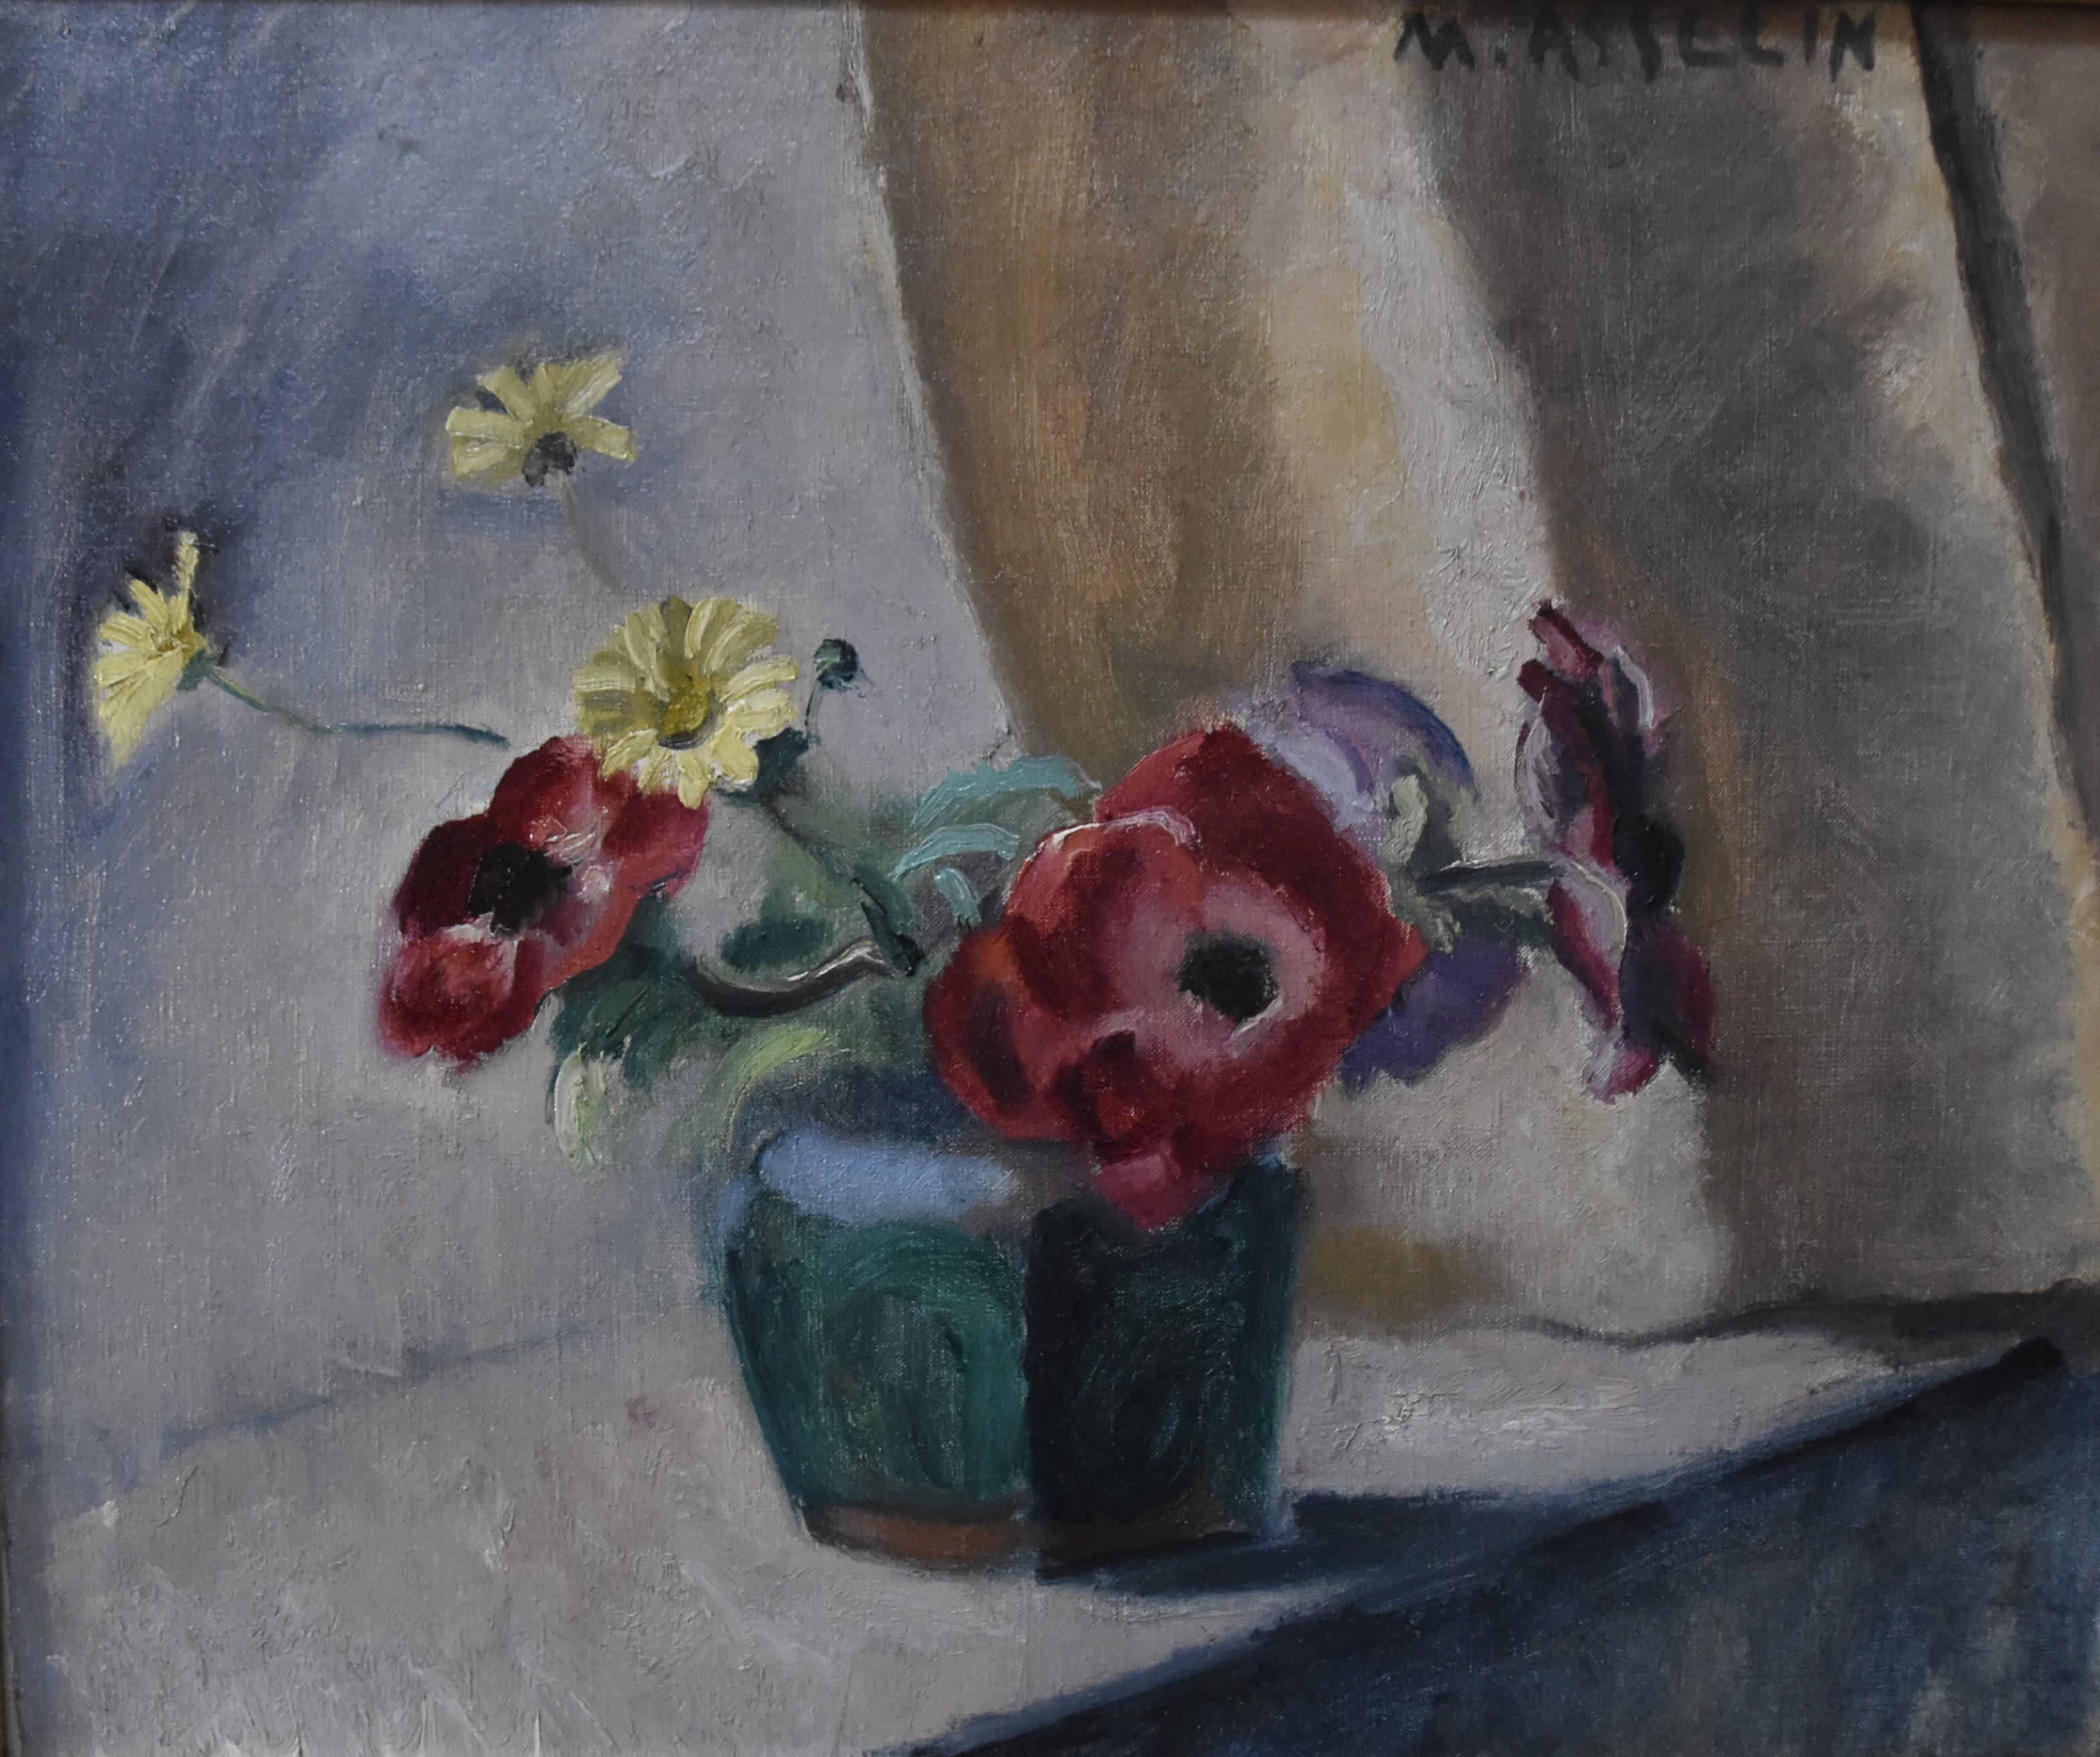 Maurice Asselin (1882-1947) 
Les Anémones, a bouquet of anemones
signed upper right
oil on canvas
38 x 46 cm
Label of the exhibition Maurice Asselin at the Galerie Schmit in february-march 1970 on the stretcher
Framed : 48 x 56 cm

This beautiful